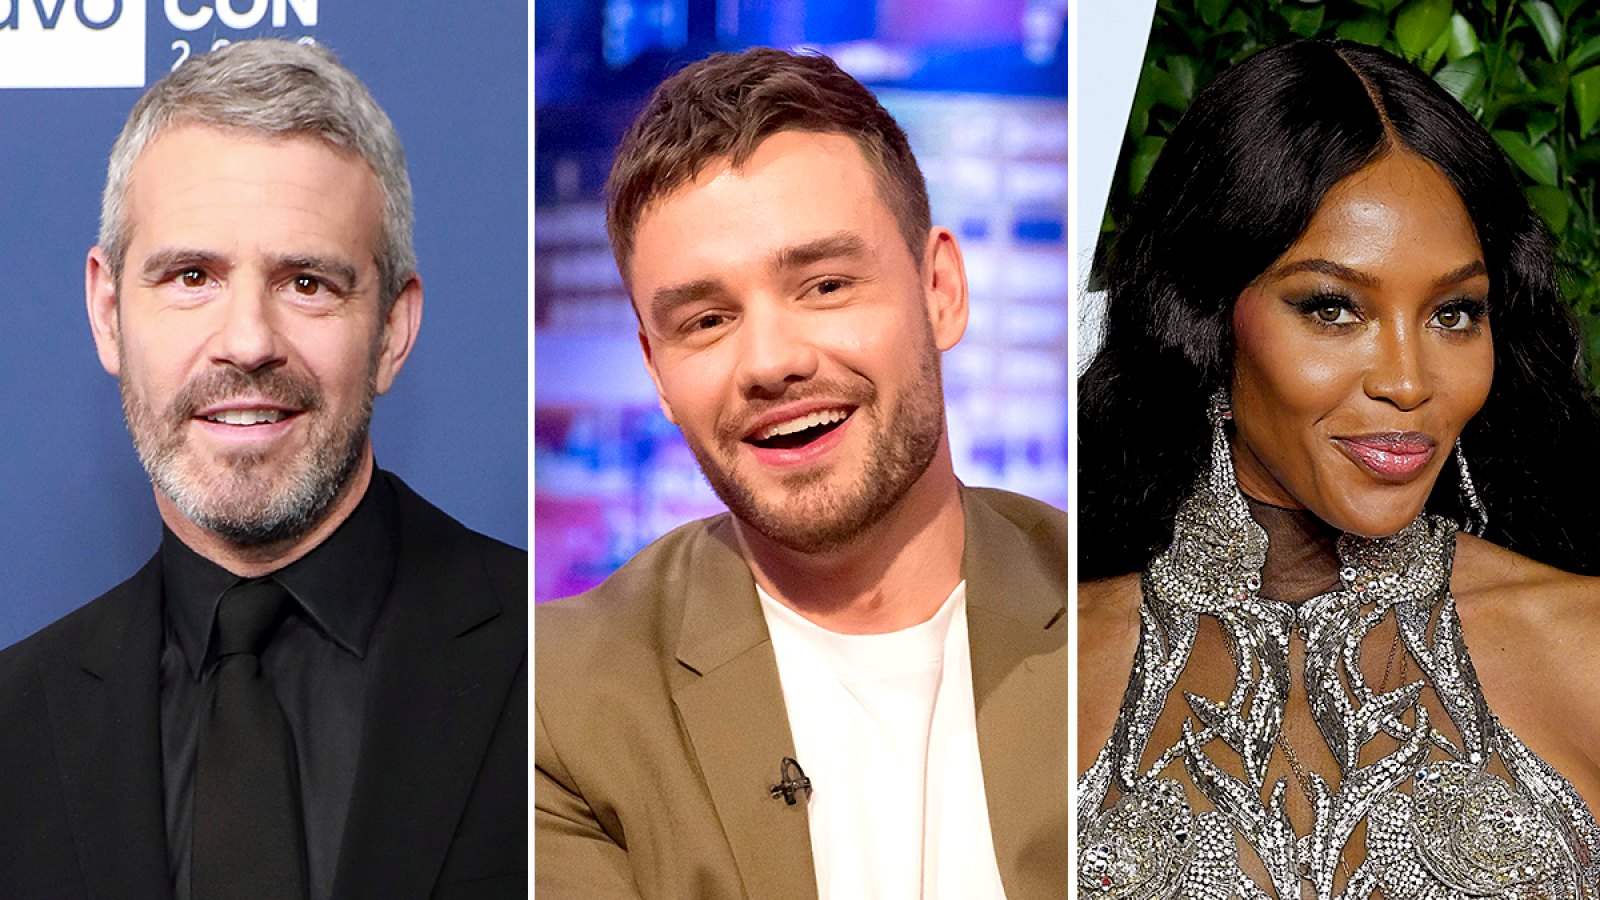 Andy-Cohen-Grills-Liam-Payne-About-Those-Naomi-Campbell-Romance-Rumors